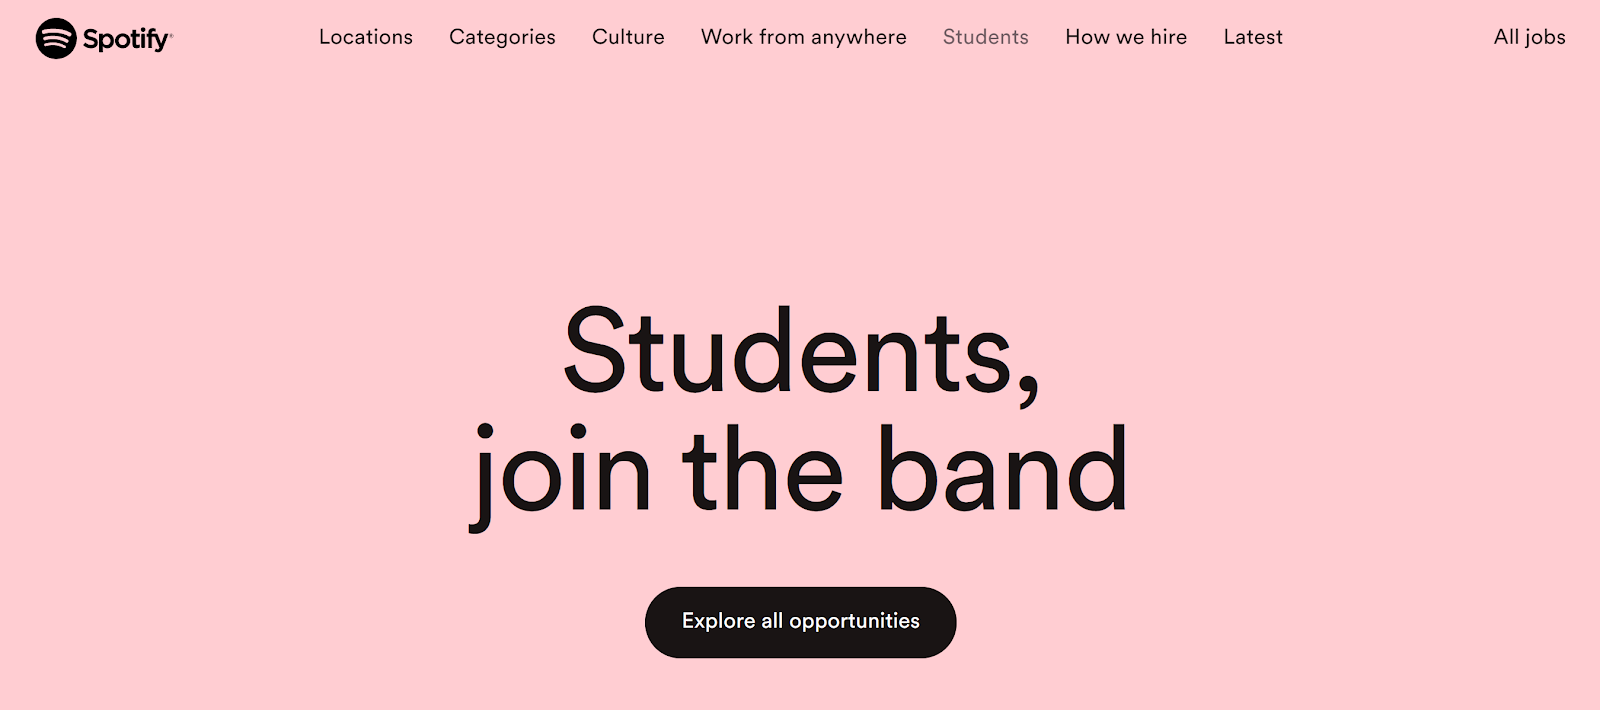 Spotify landing page for the student talent pool.